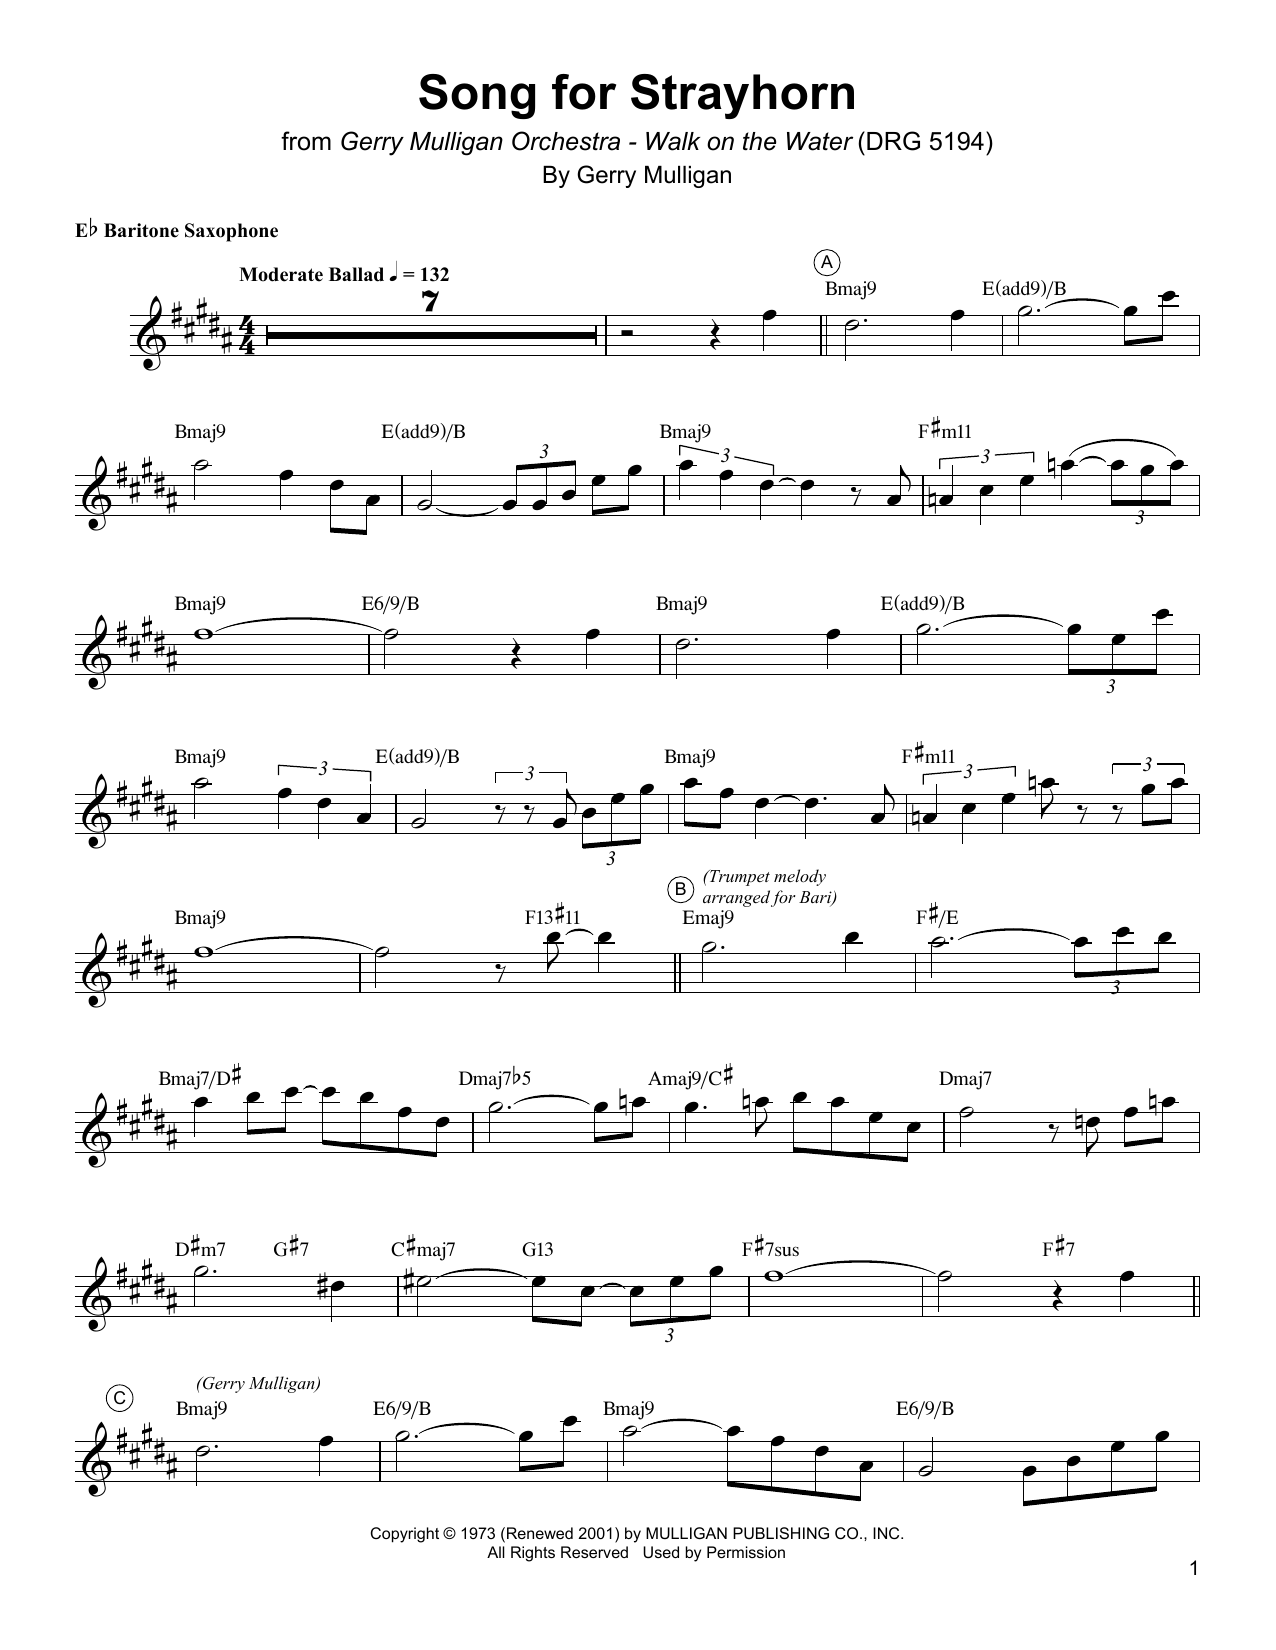 Download Gerry Mulligan Song For Strayhorn Sheet Music